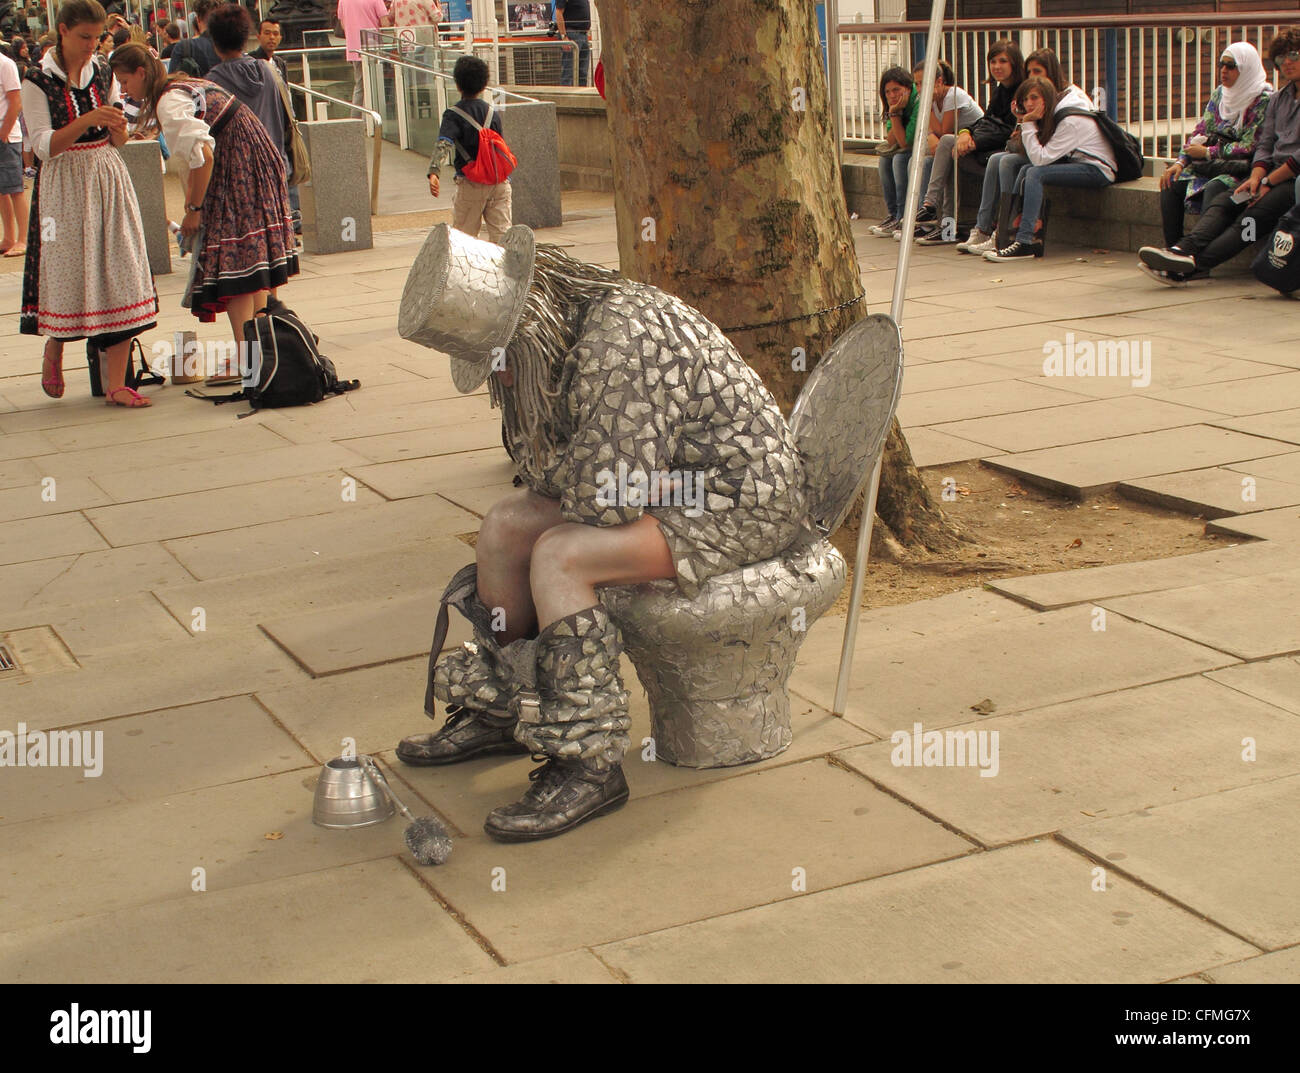 Silver coloured street performer on the SouthBank in London sitting on pretend toilet Stock Photo